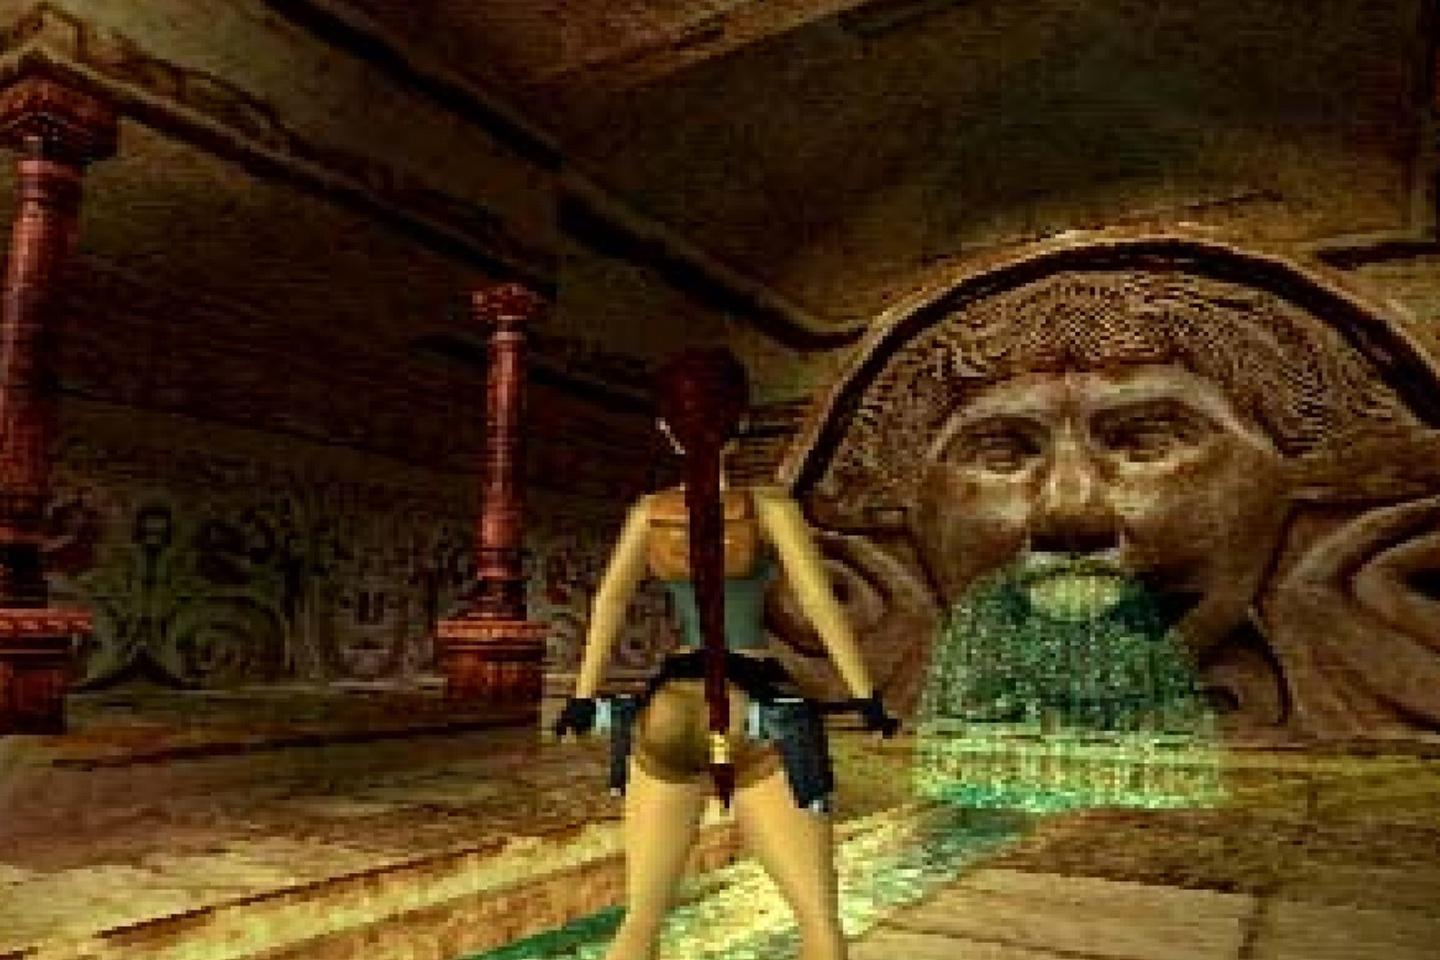 Lara facing fountain with a large face in dimly lit tomb.